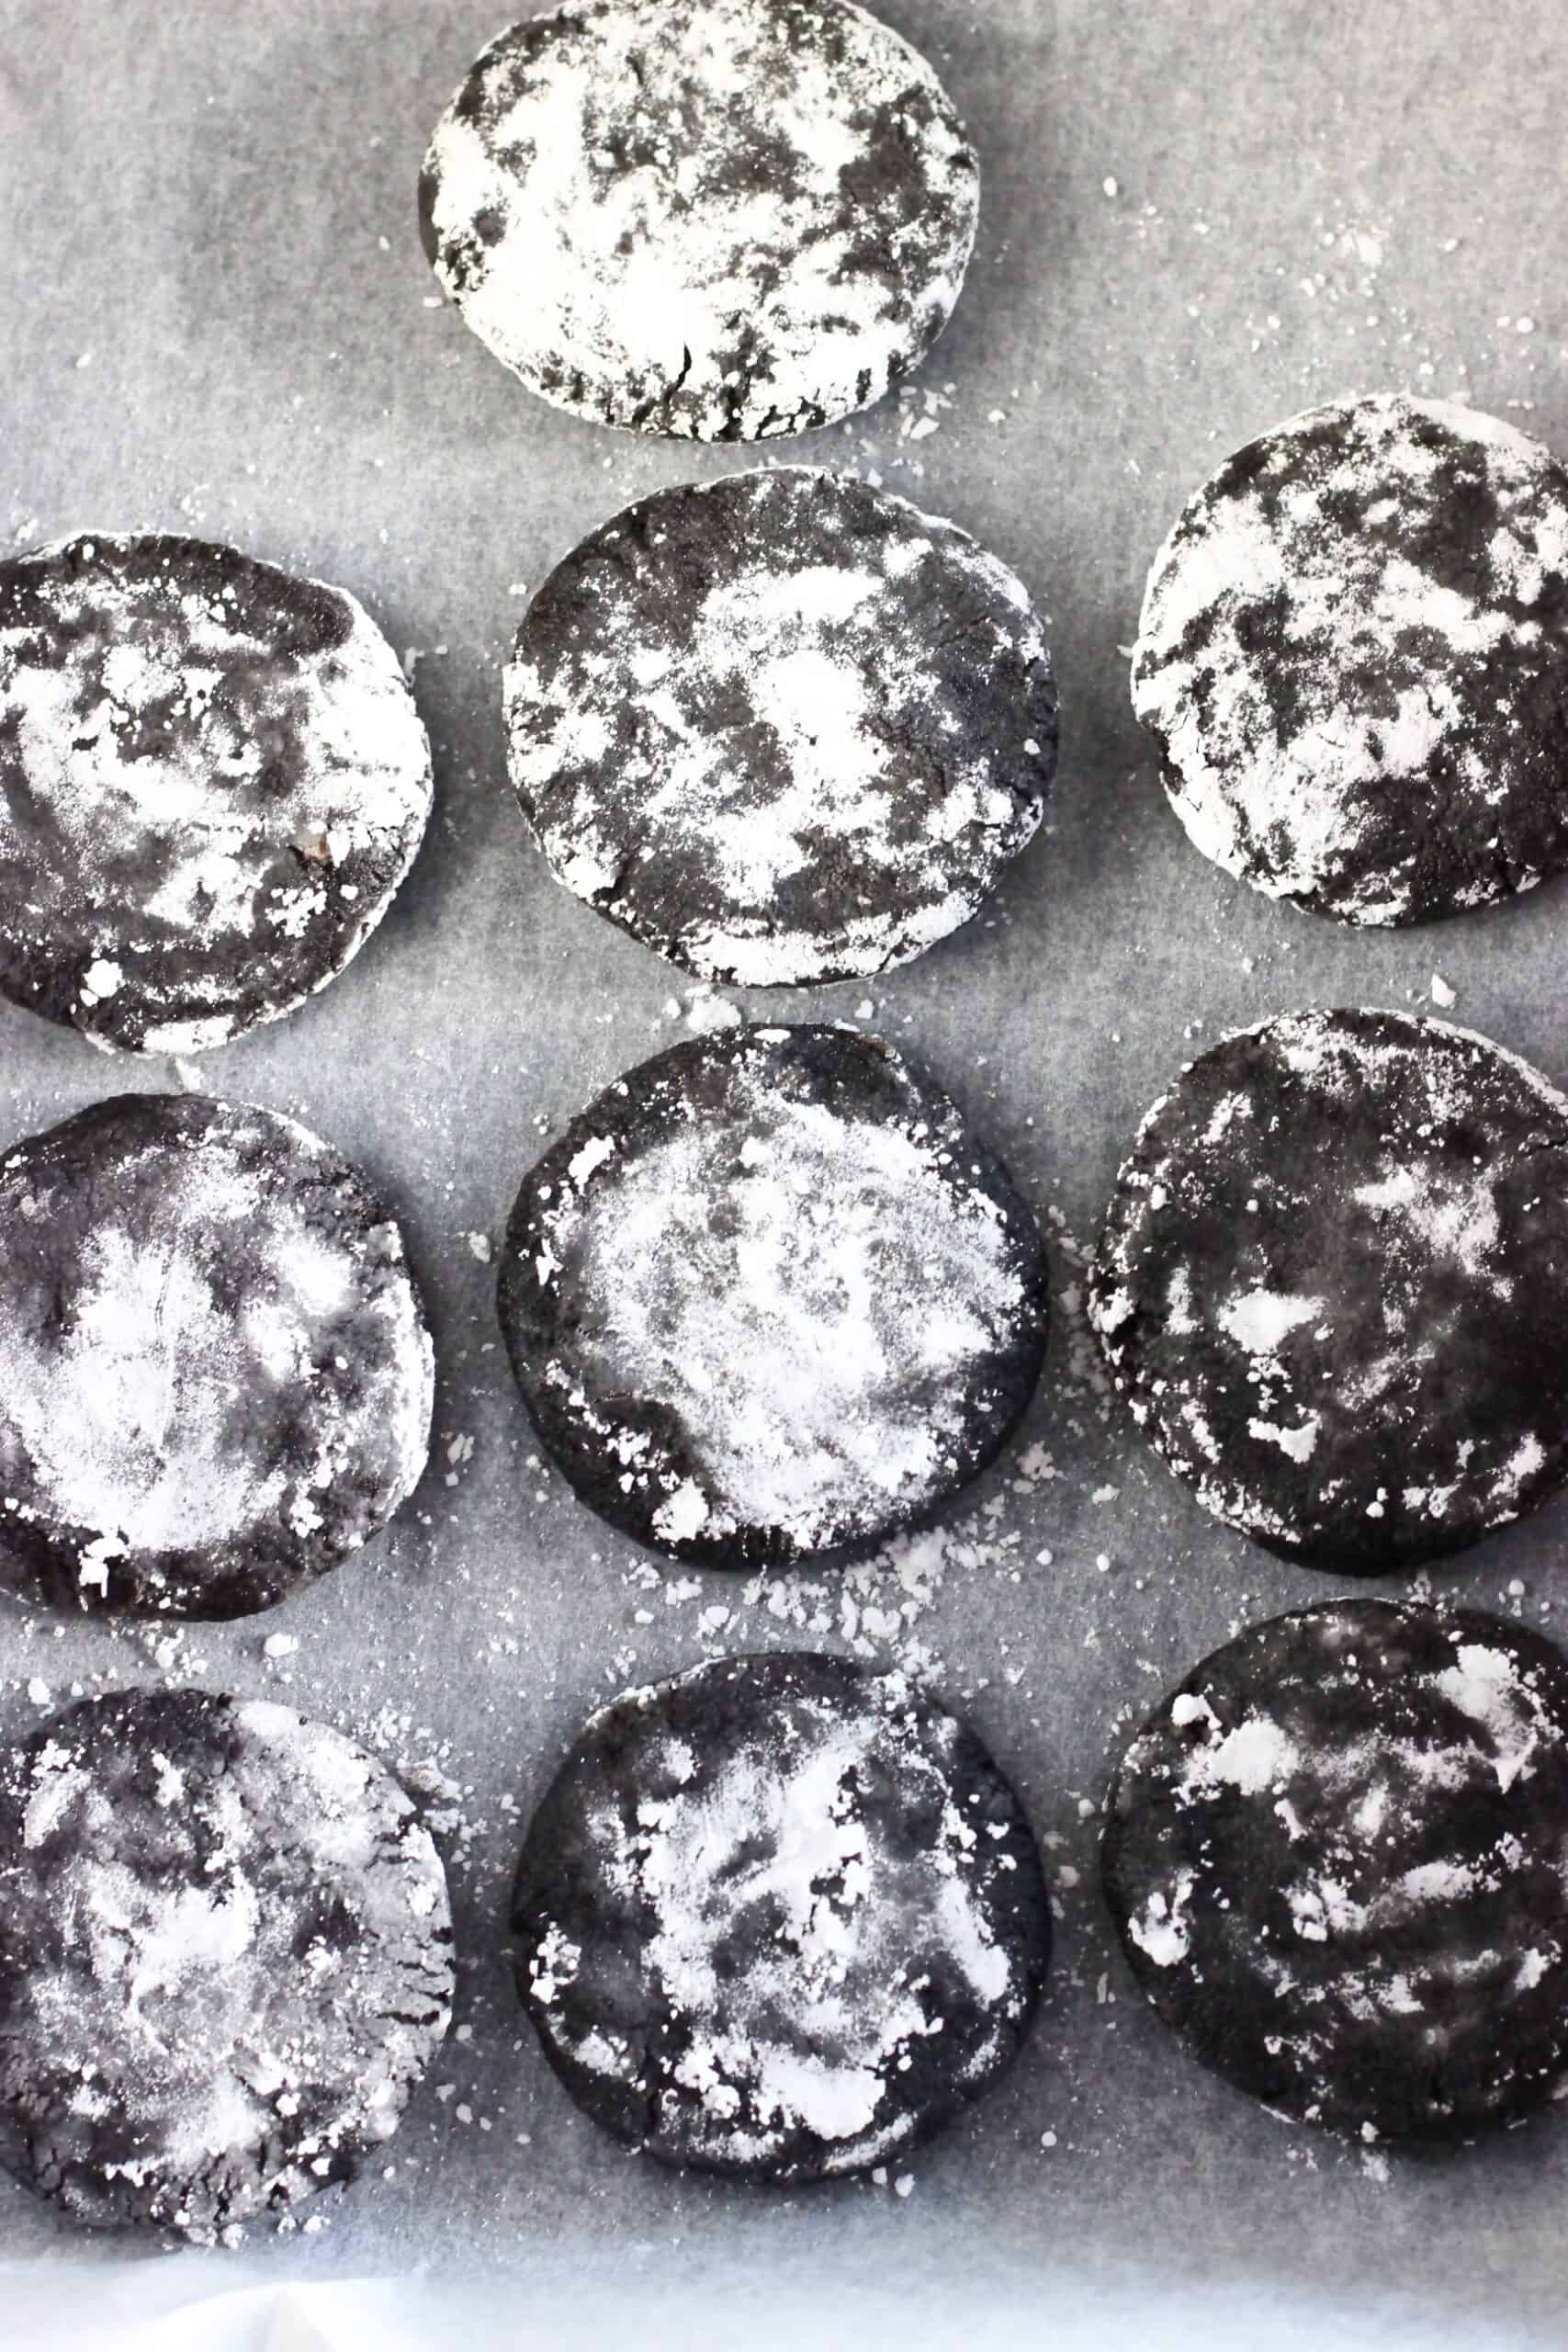 10 raw gluten-free vegan chocolate crinkle cookies on a baking tray lined with baking paper